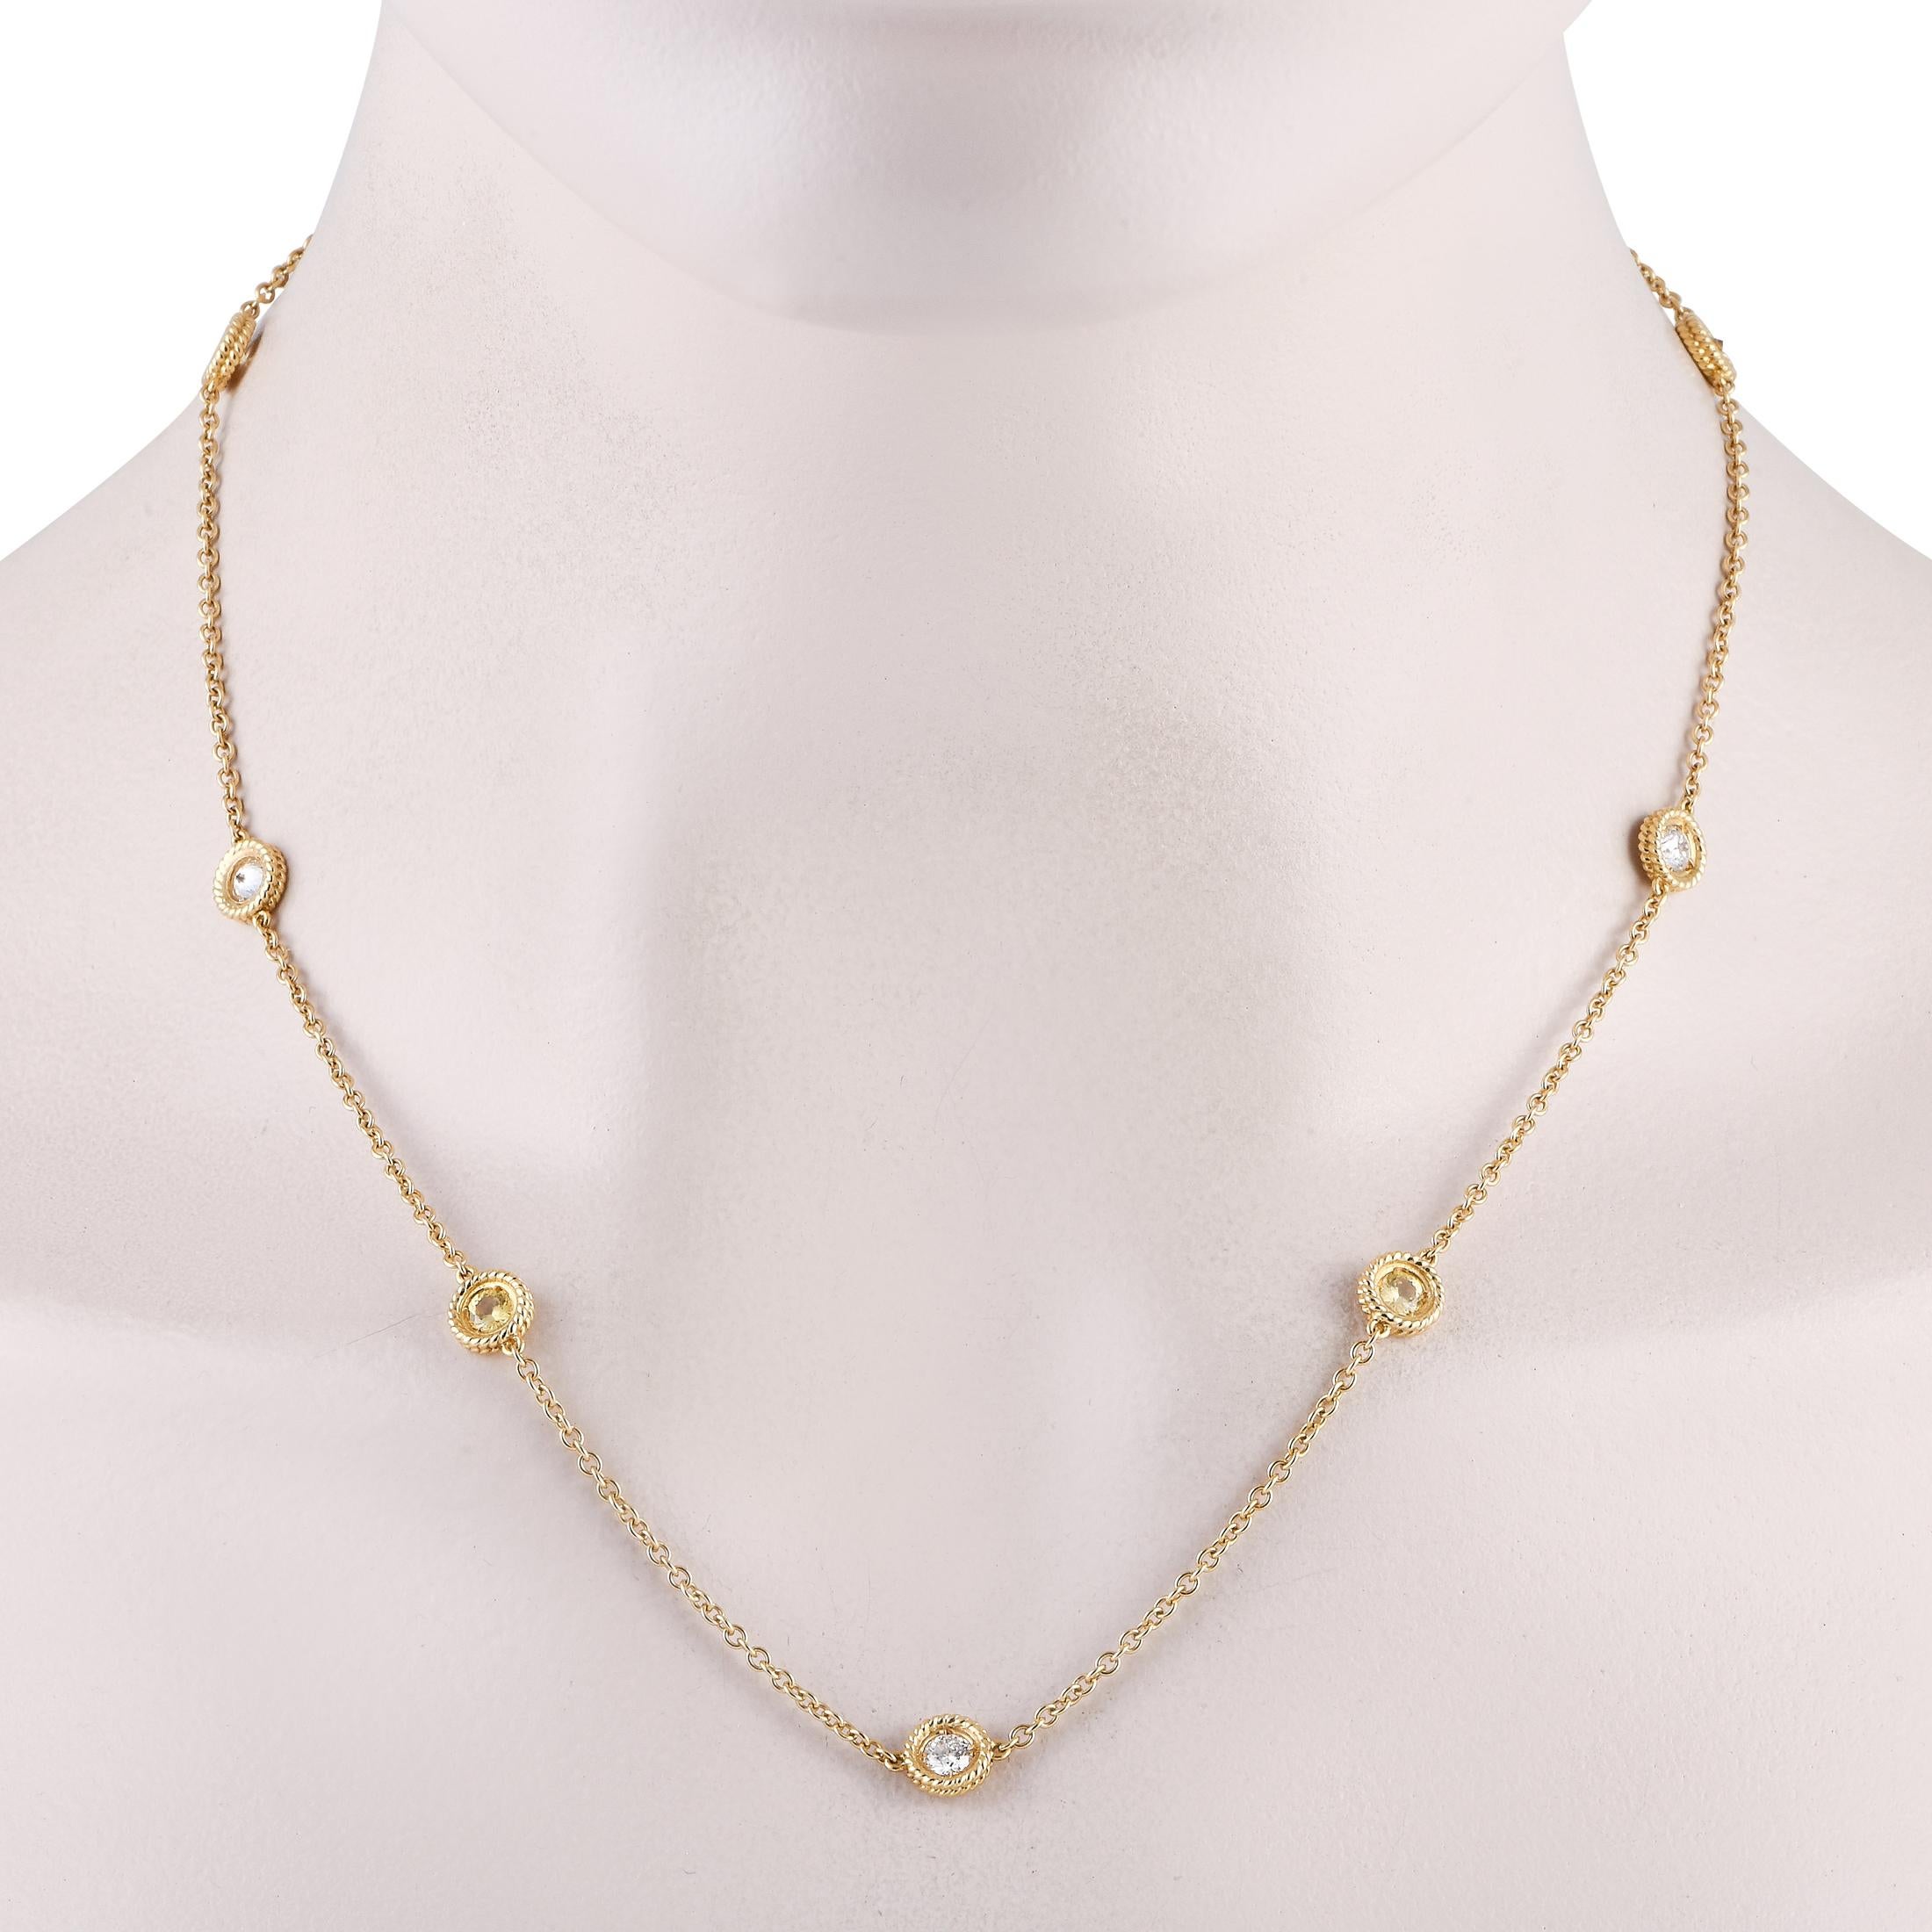 This Roberto Coin Station necklace is a timeless piece that will add elegance to any occasion. The delicate 18K yellow gold chain measures 19.0” long and is elevated by bezel-set diamonds totaling 0.70 carats and sapphires with a total weight of